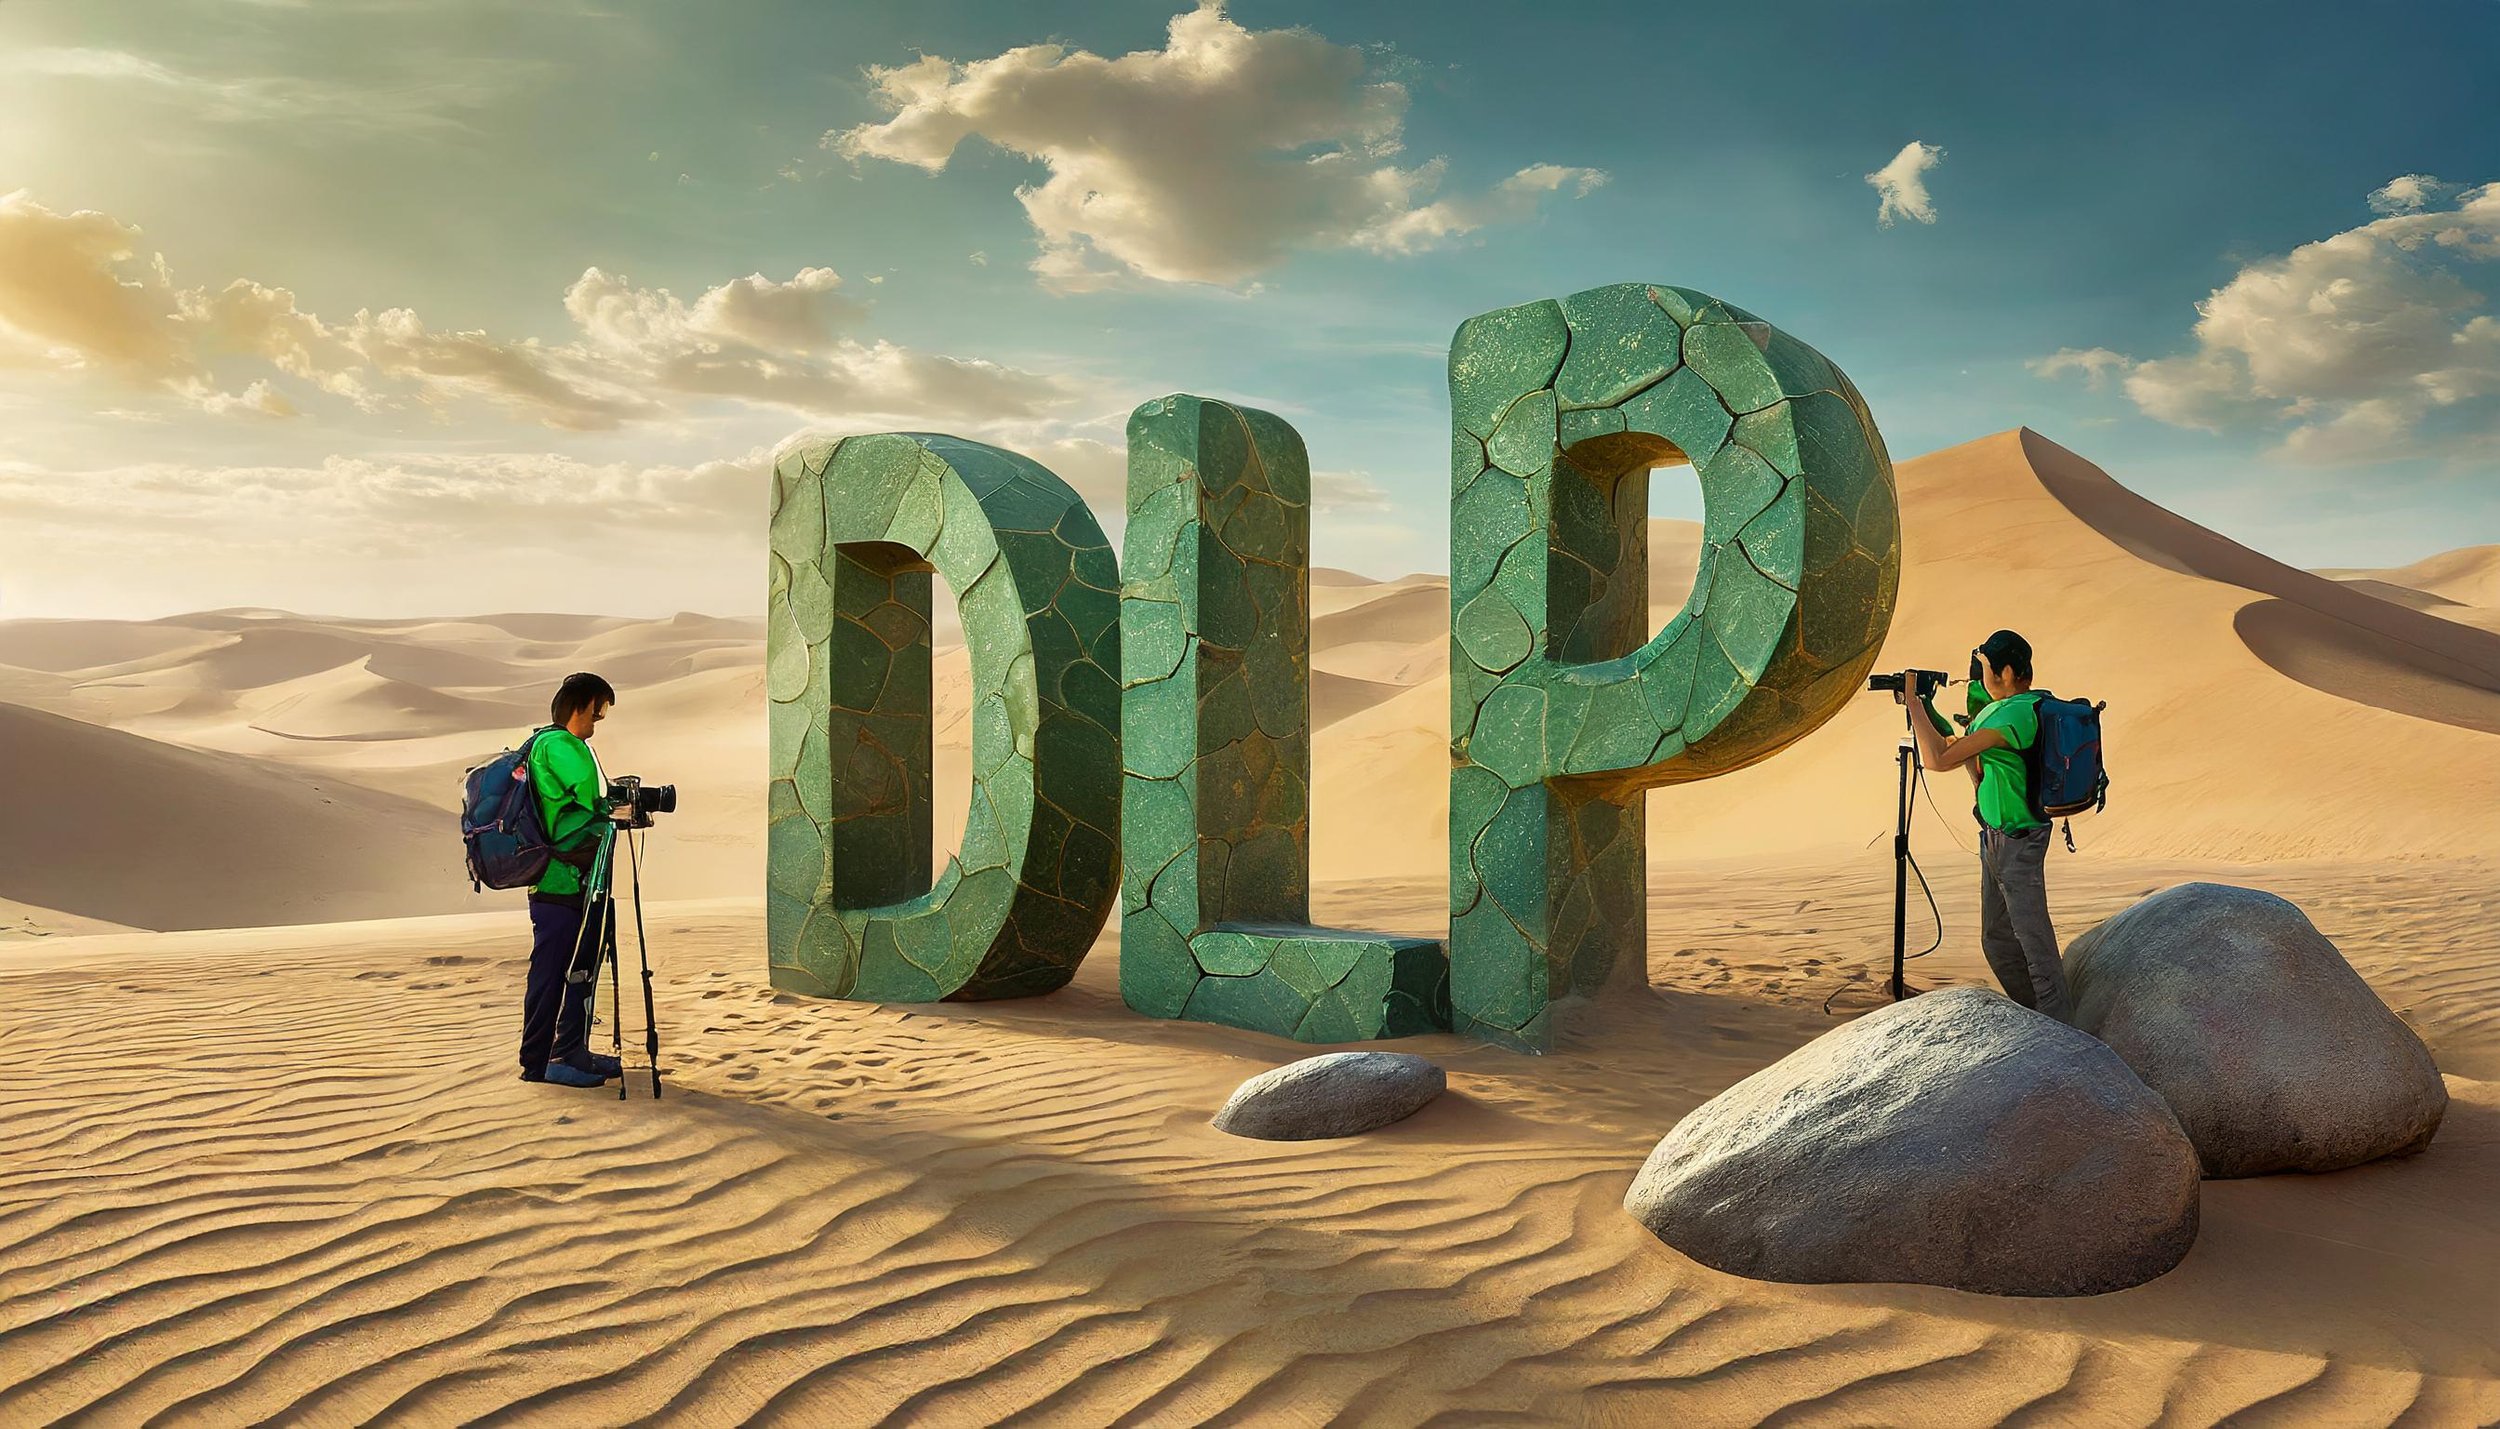 Firefly the large letters DLP, which are green in color and textured like stones, sit together in a -2.jpg